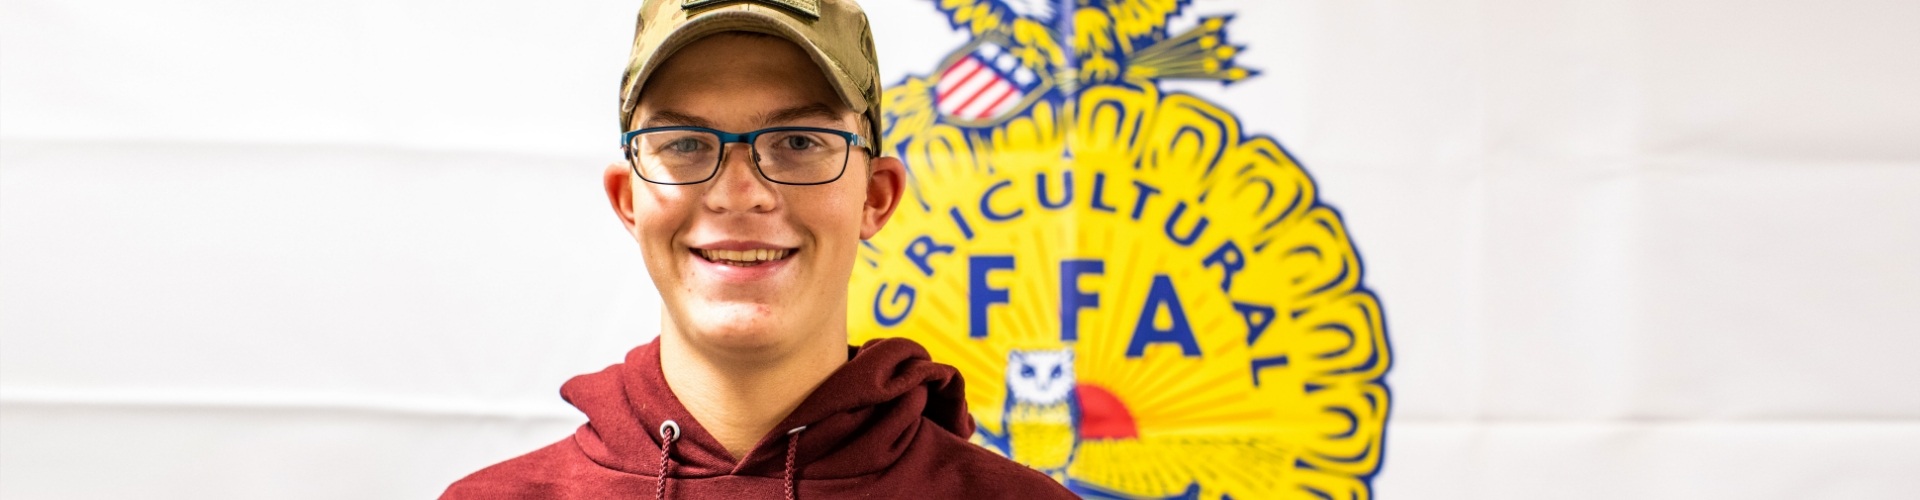 FFA student standing in front of the FFA Logo on a wall